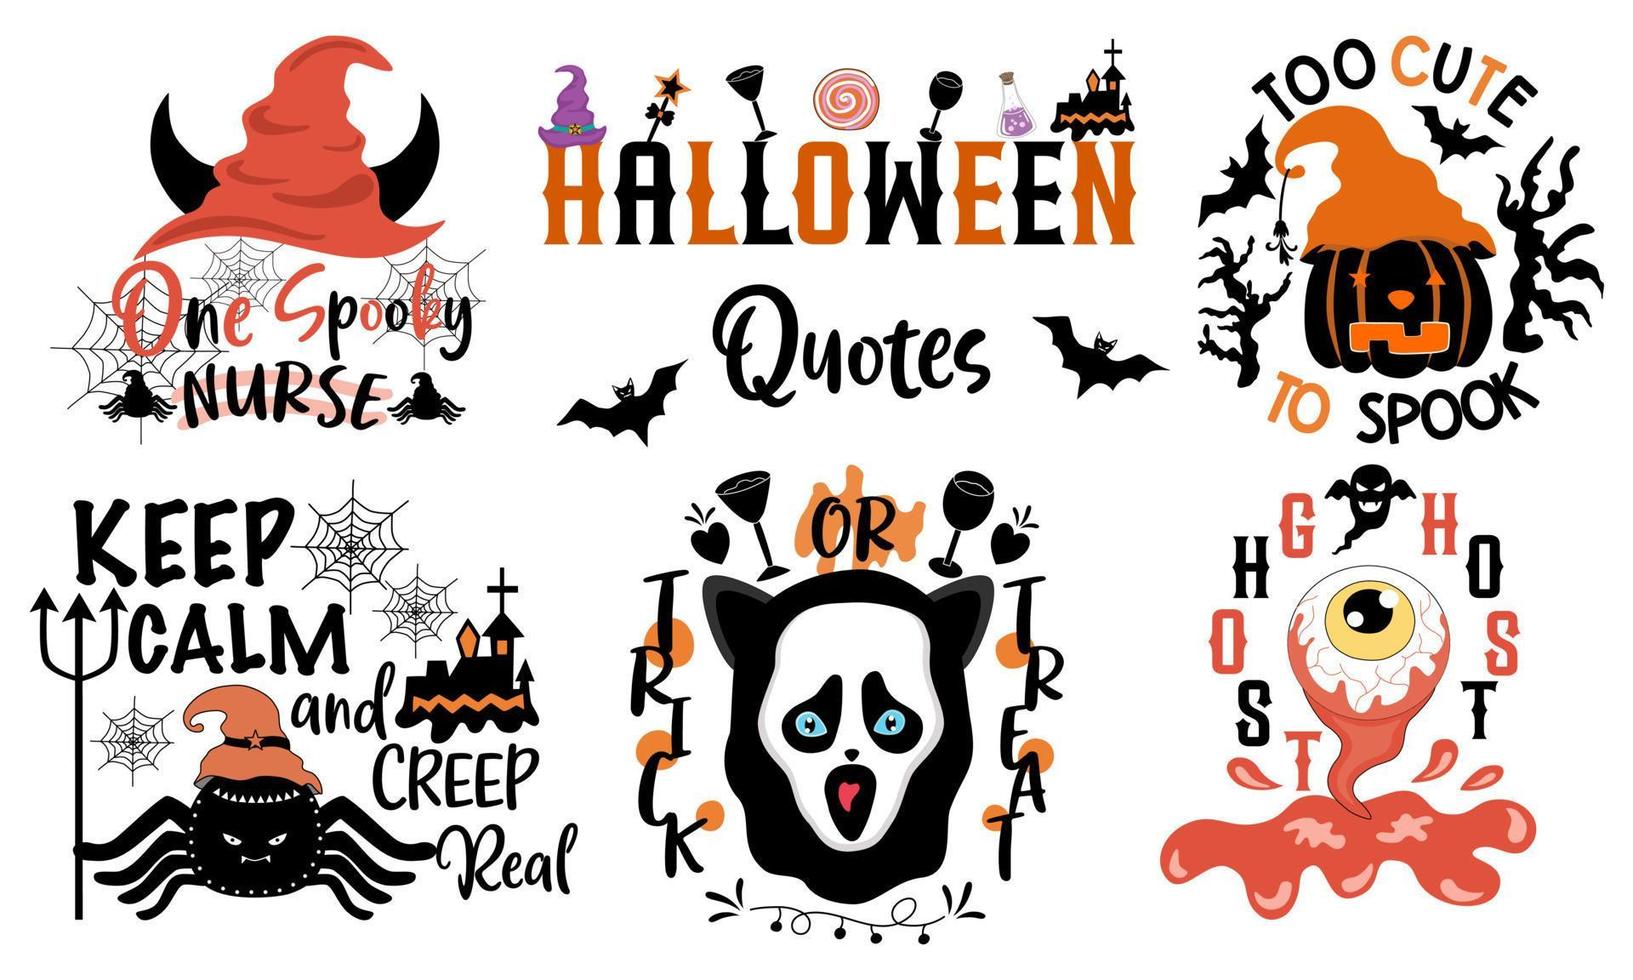 Halloween quotes set designed in doodle style in black and orange tones on white background for Halloween themed decorations, t-shirt design,  bags patterns, mugs, fabric patterns, T-shirts designs vector